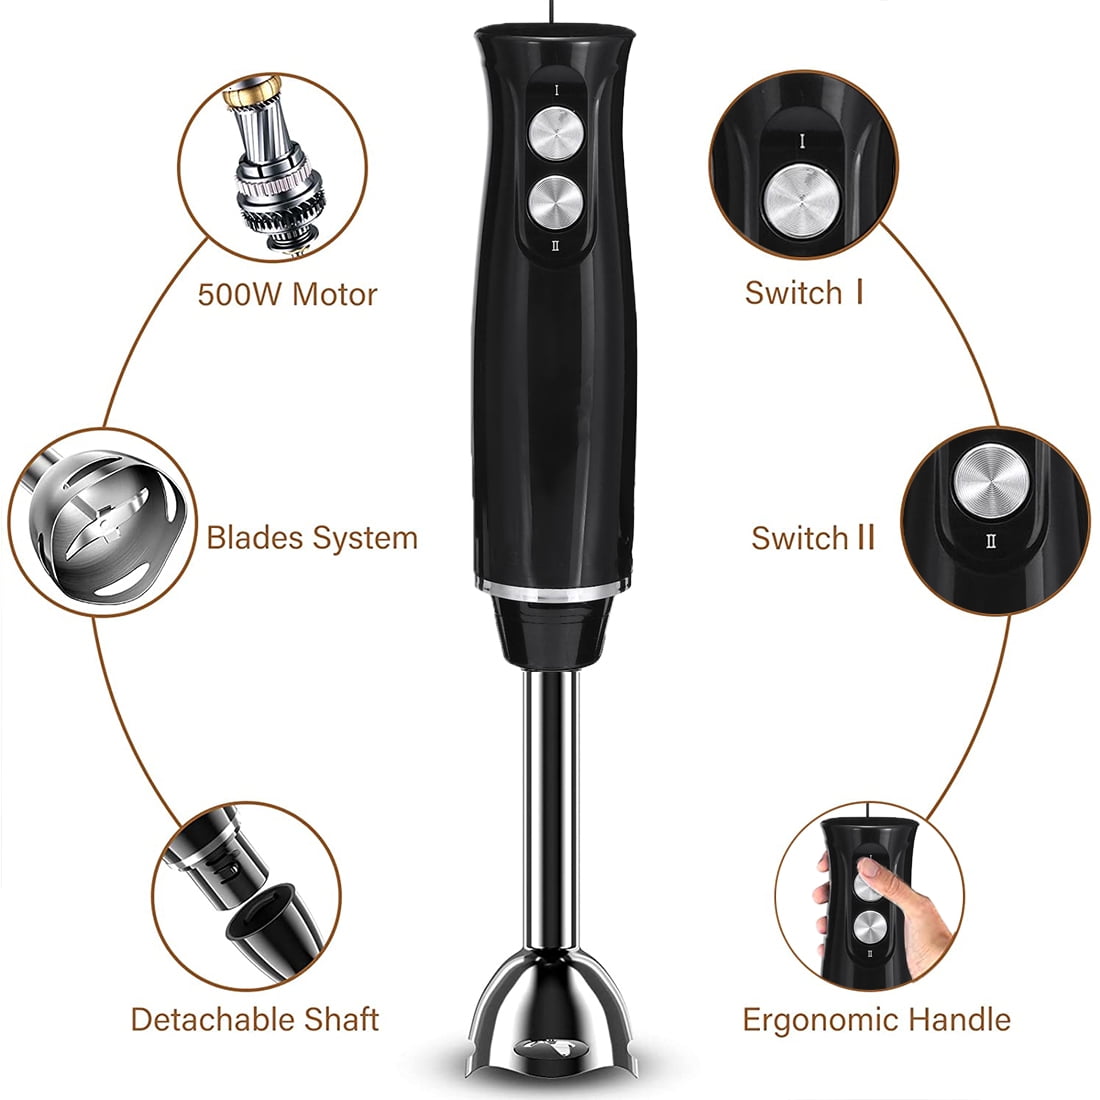 Dropship 5 Core Immersion Portable Hand Blender 5-In-1 500W Handheld 8  Variable Powerful Stainless Steel With Electric Whisker; 2-Blades 860ml  Food Processor; Chopper 600ml Mixing Beaker HB 1520 to Sell Online at